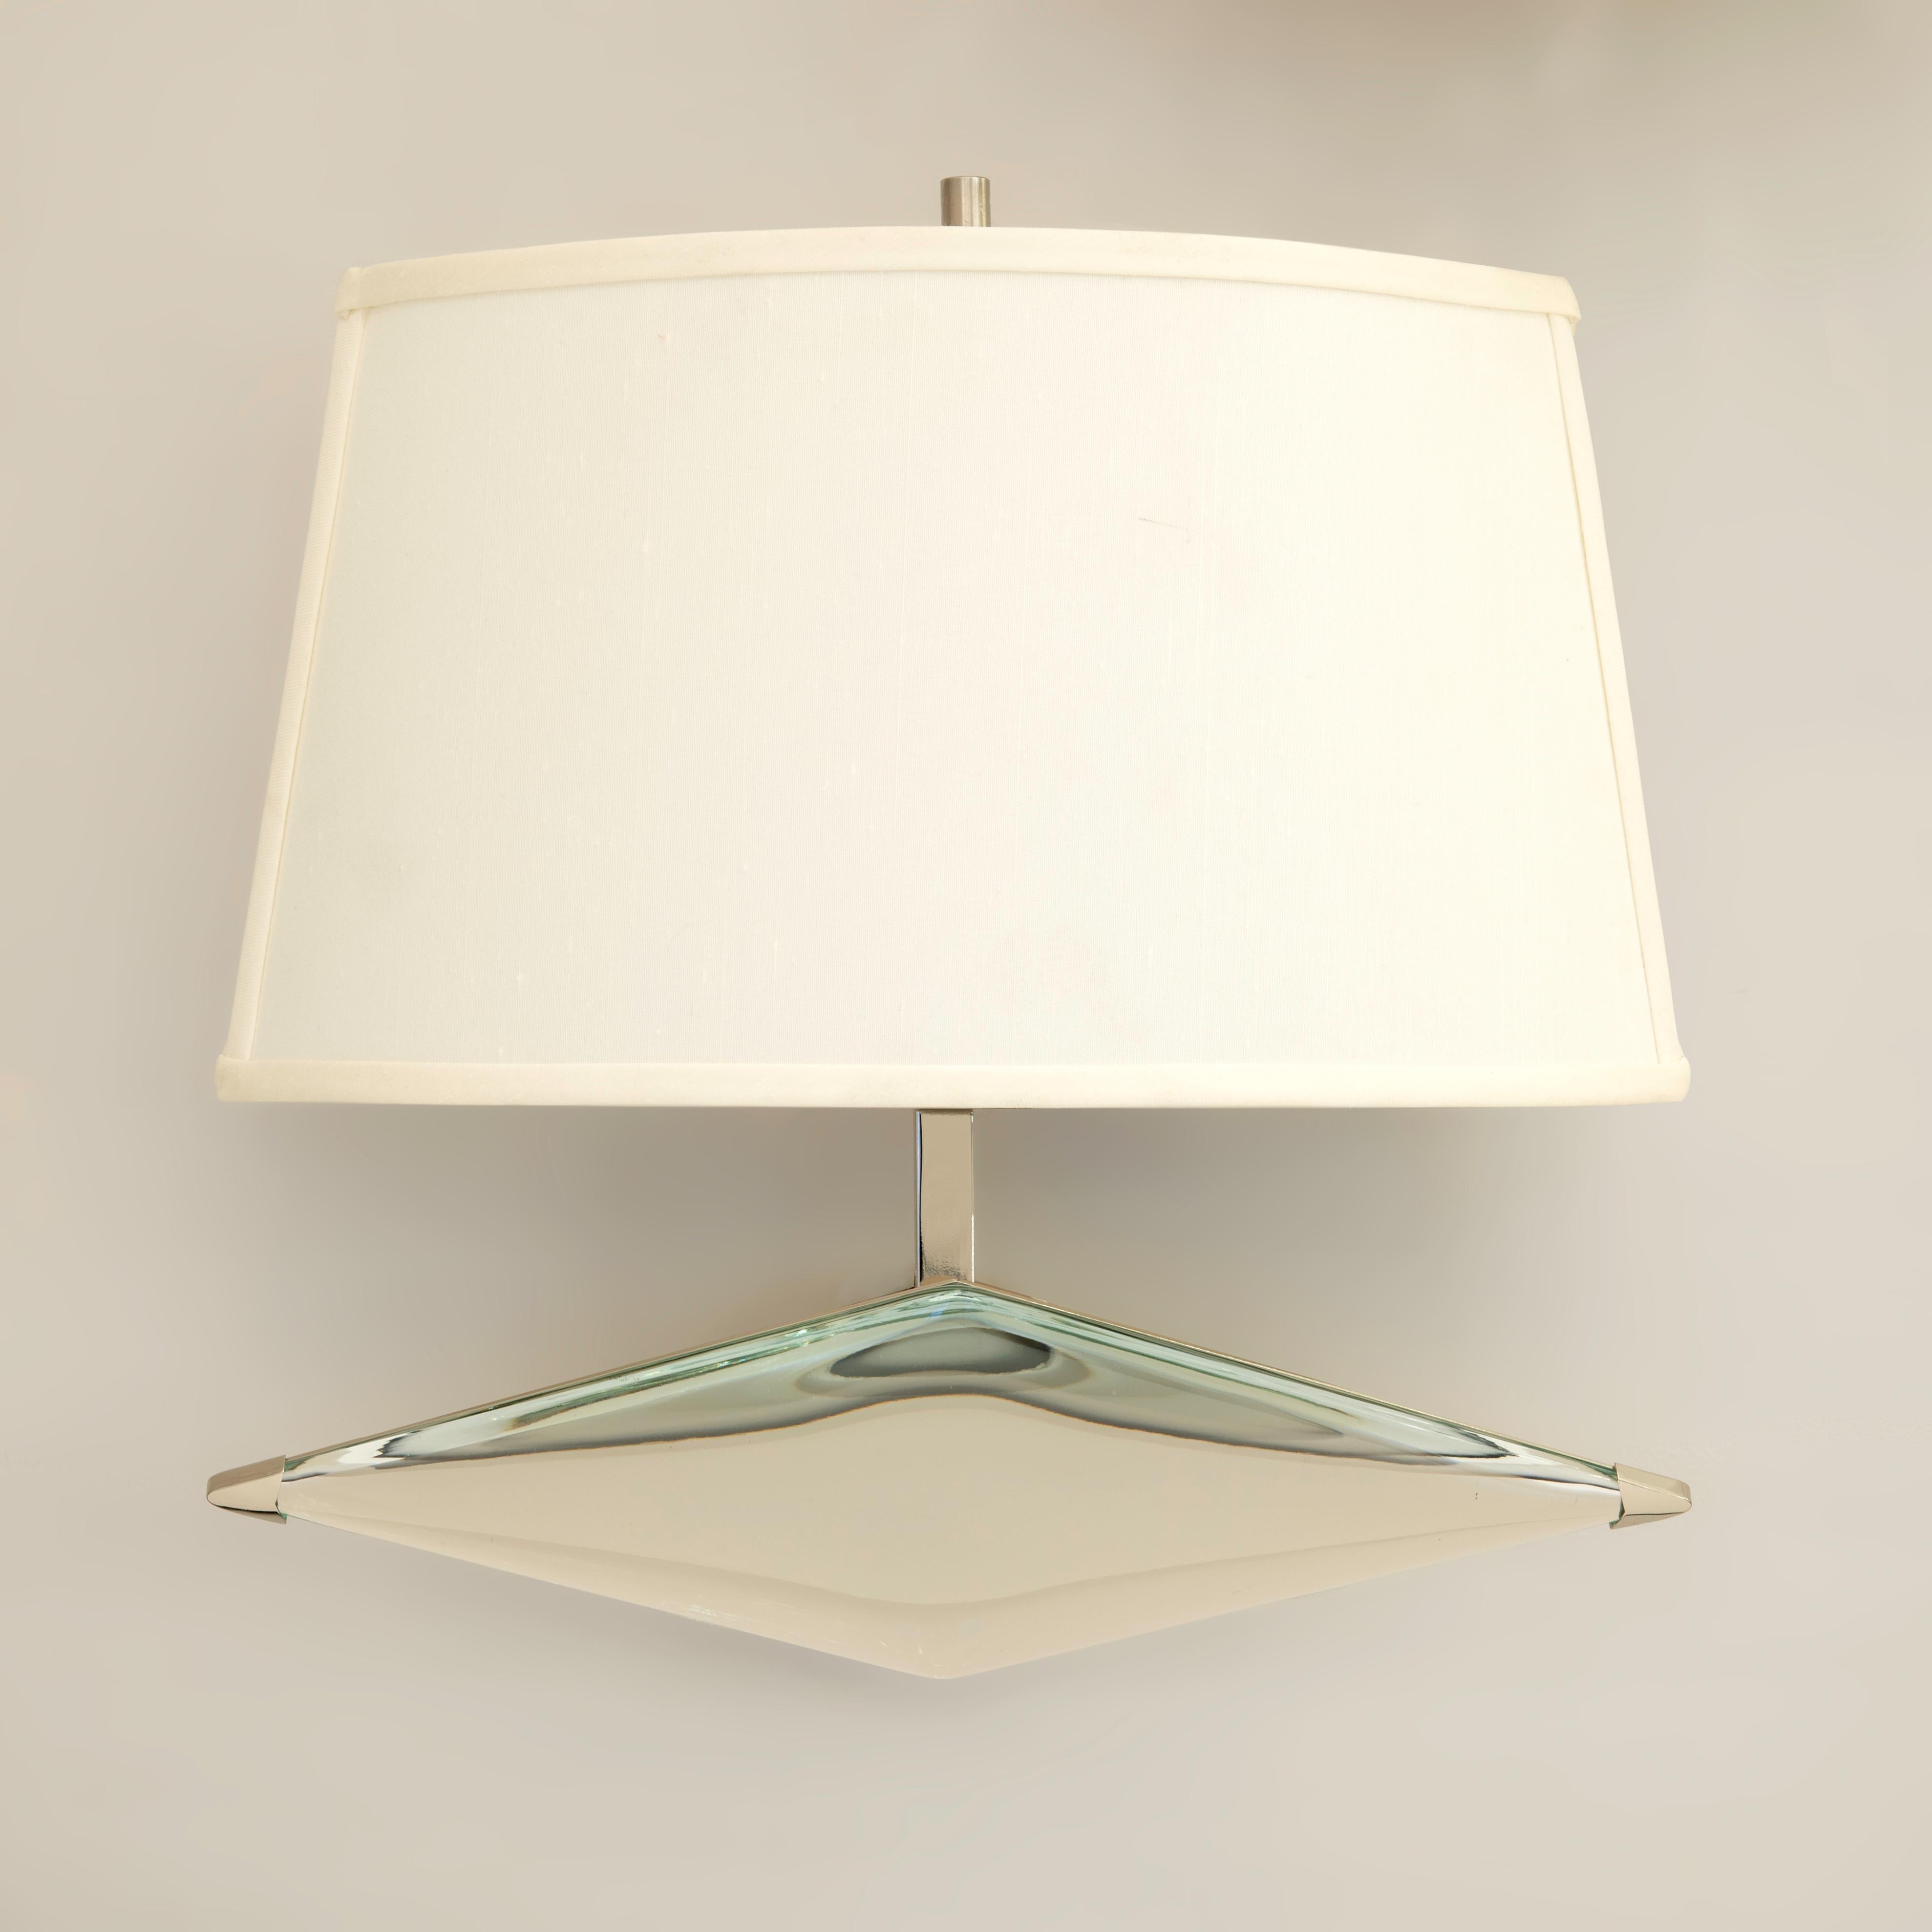 The rombo wall light is designed around a thick starphire glass which has been hand carved in the shape of rhombus. Mounted on a sloping frame ending with a silk shade. Shown in polished nickel. Listed price is for the stock model in polished